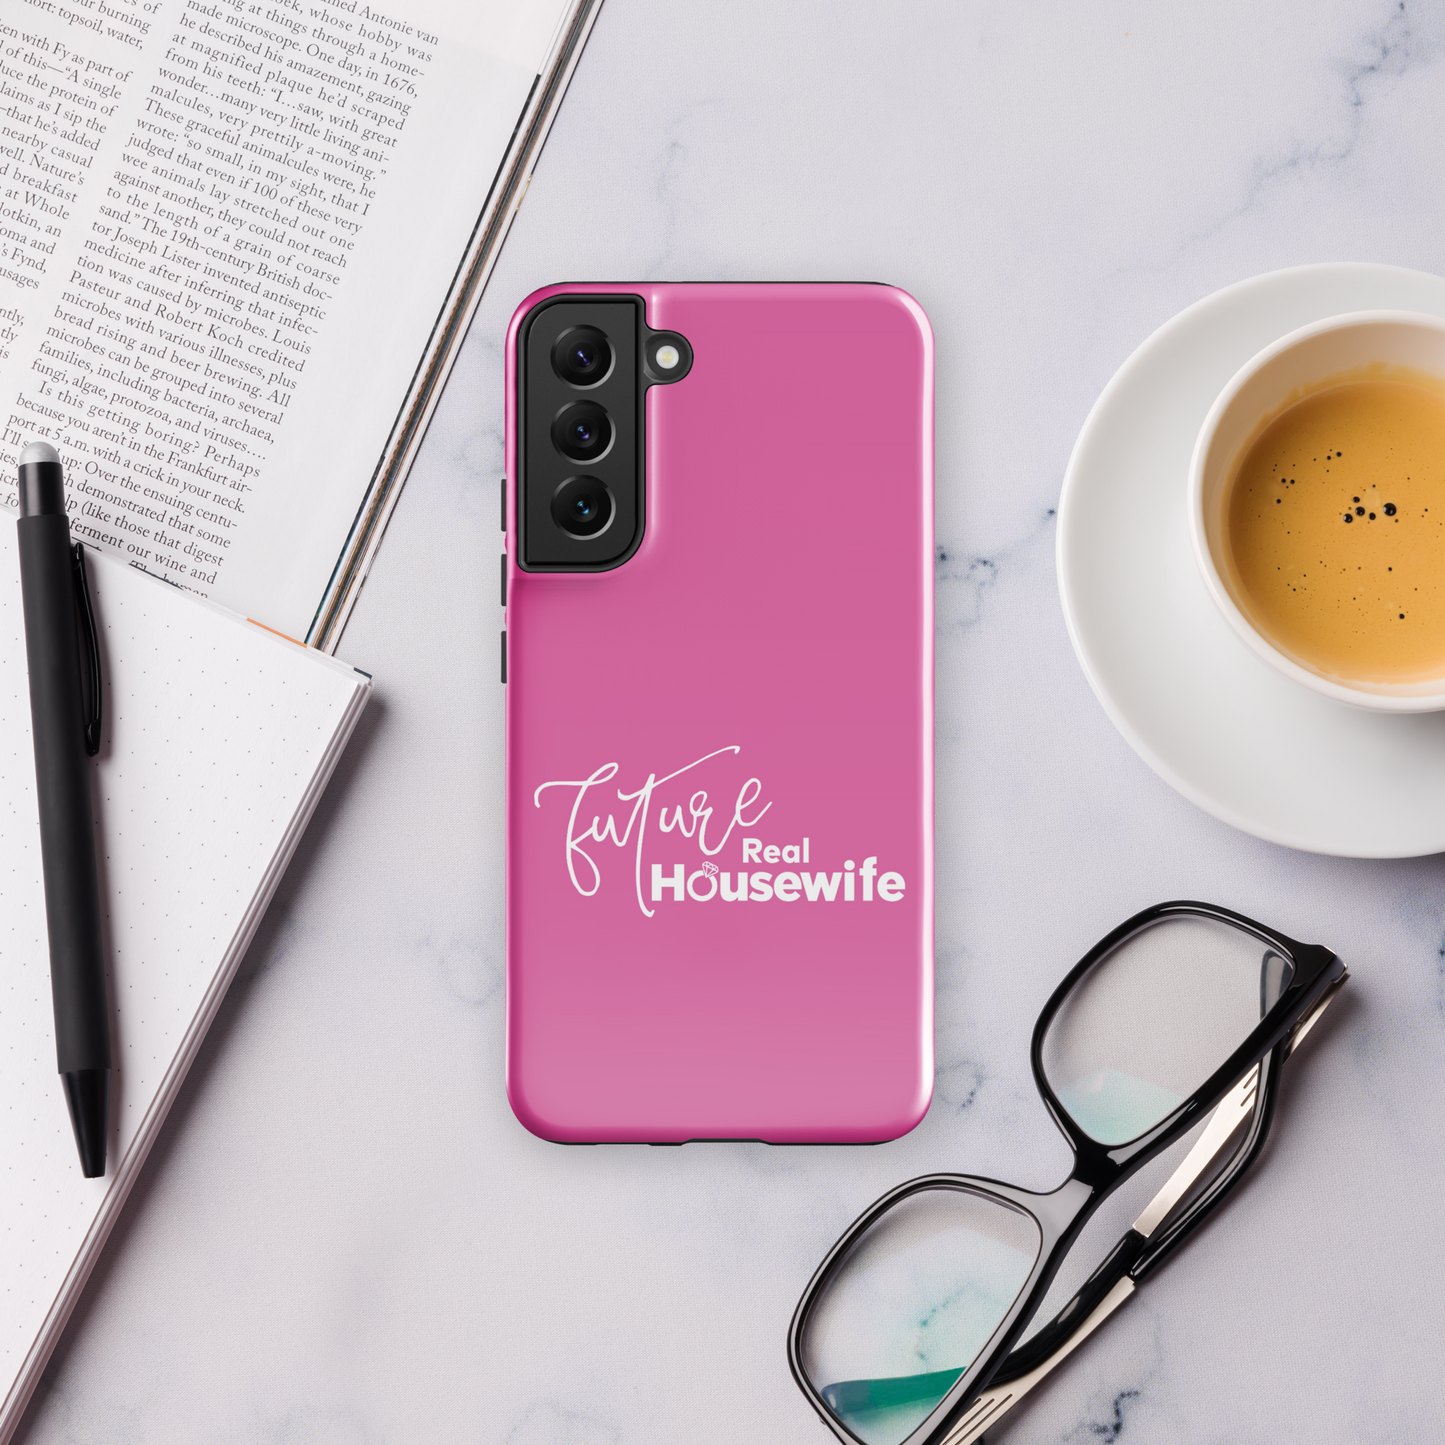 Bravo Gear Future Real Housewife Tough Phone Case - Samsung